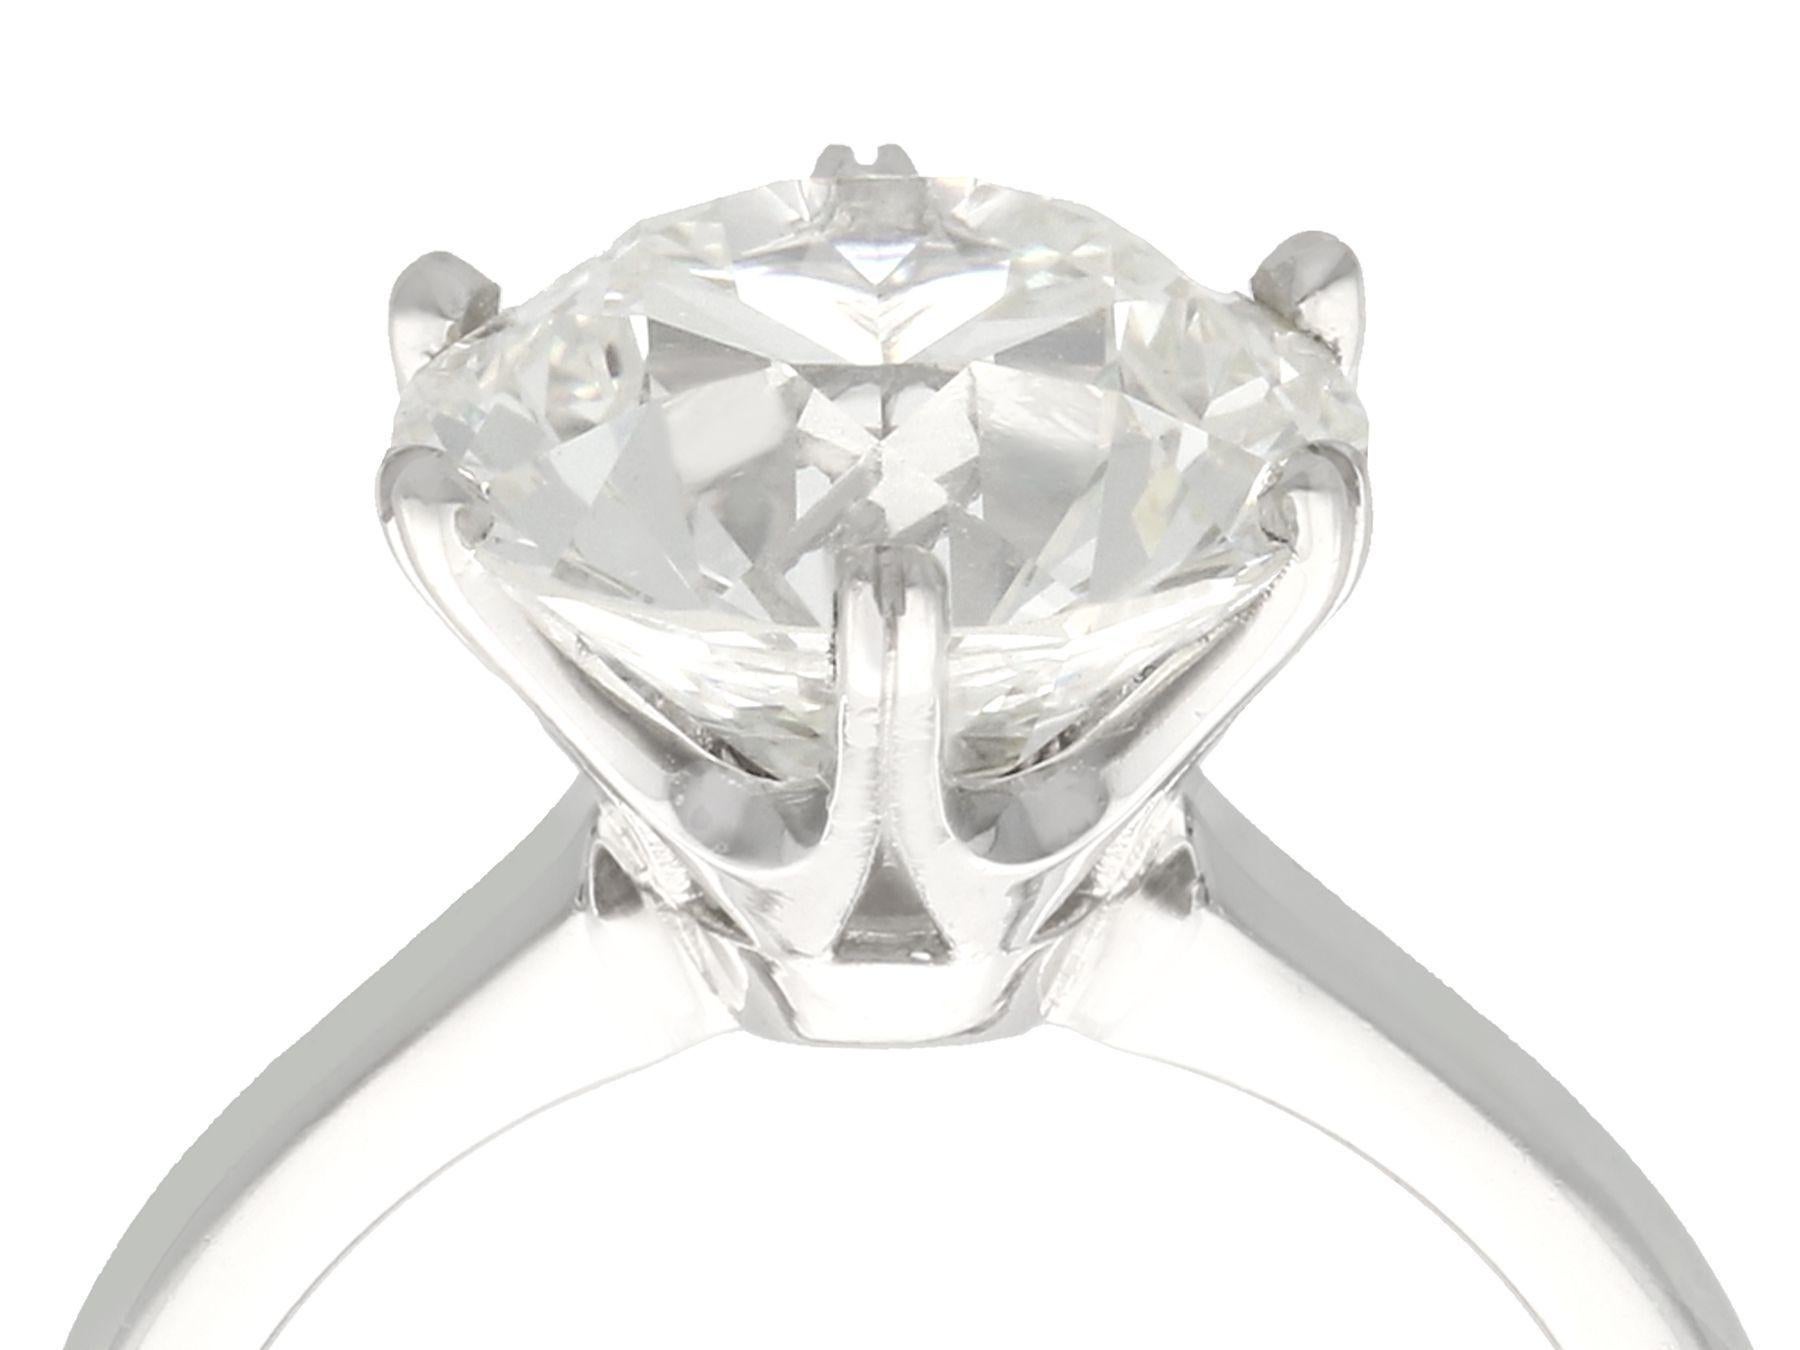 An exceptional and impressive antique 4.89 carat diamond solitaire ring, displayed in a contemporary platinum setting; part of our diverse diamond jewelry collections.

An exceptional and impressive antique 4.89 carat diamond solitaire ring is